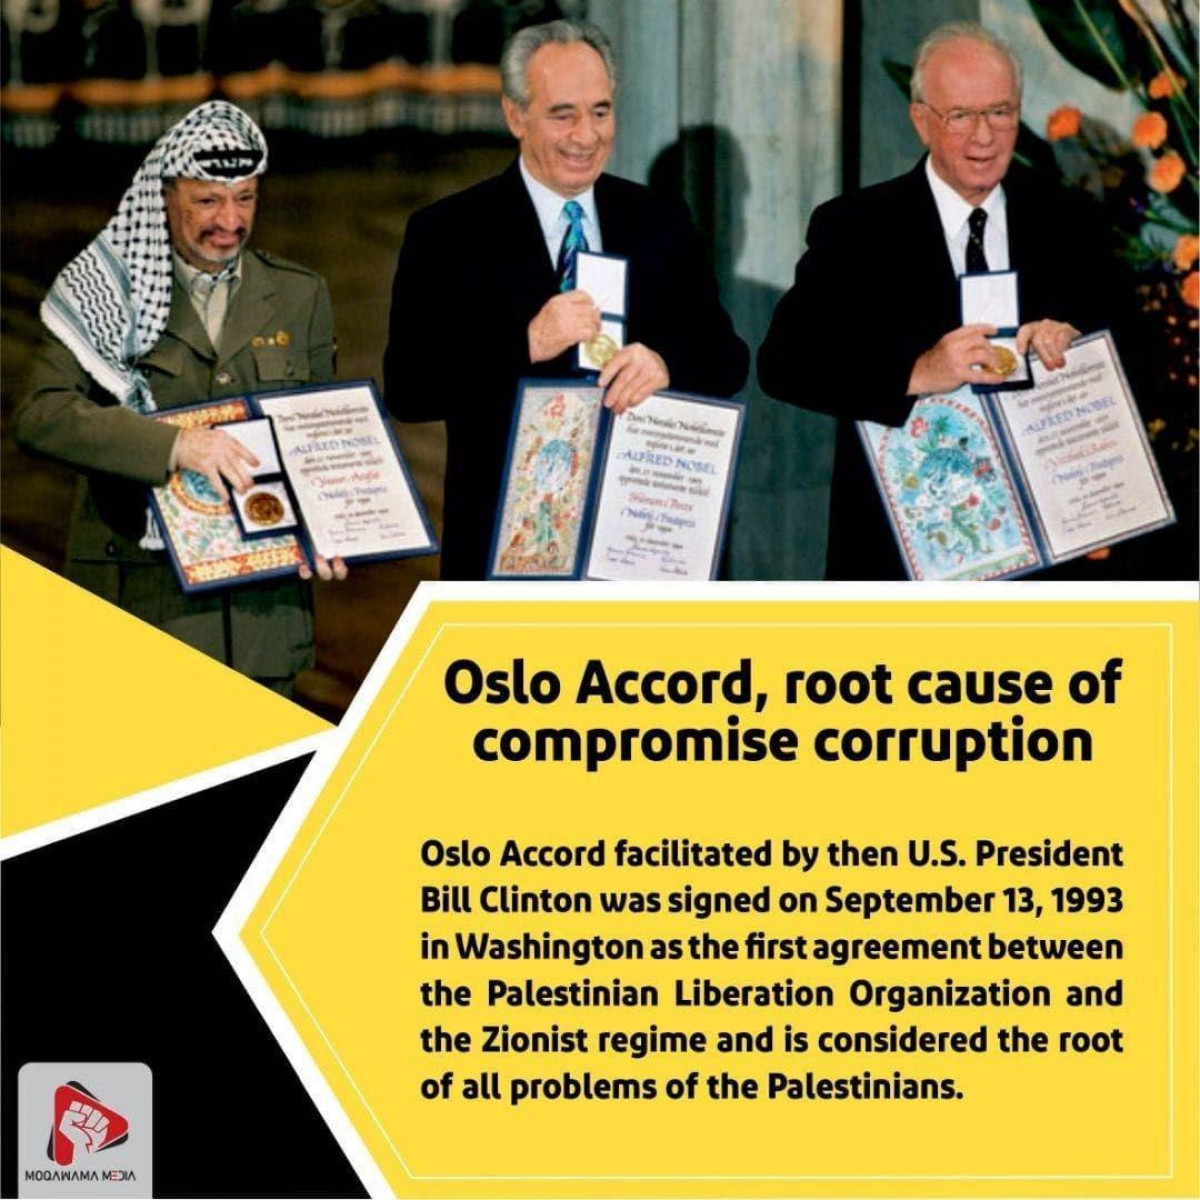 Oslo Accord, root cause of compromise corruption